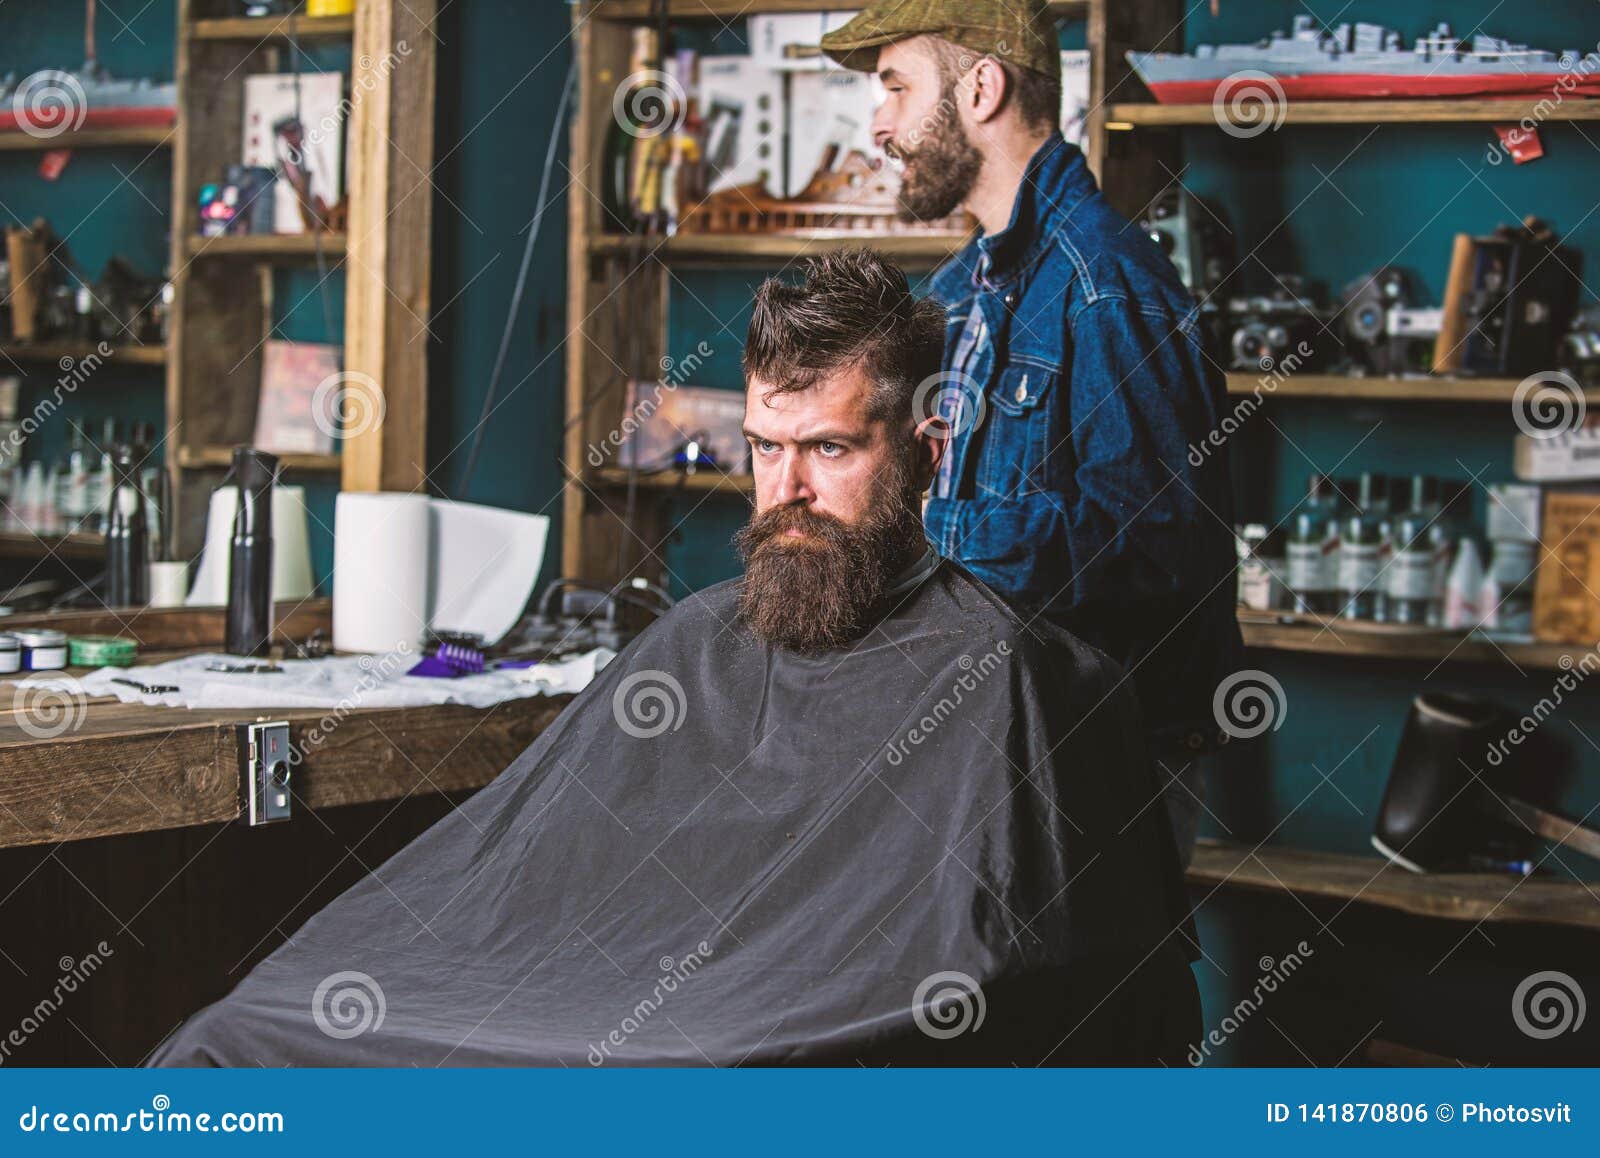 Hipster Client Getting Haircut. Client with Beard Ready for Trimming or ...